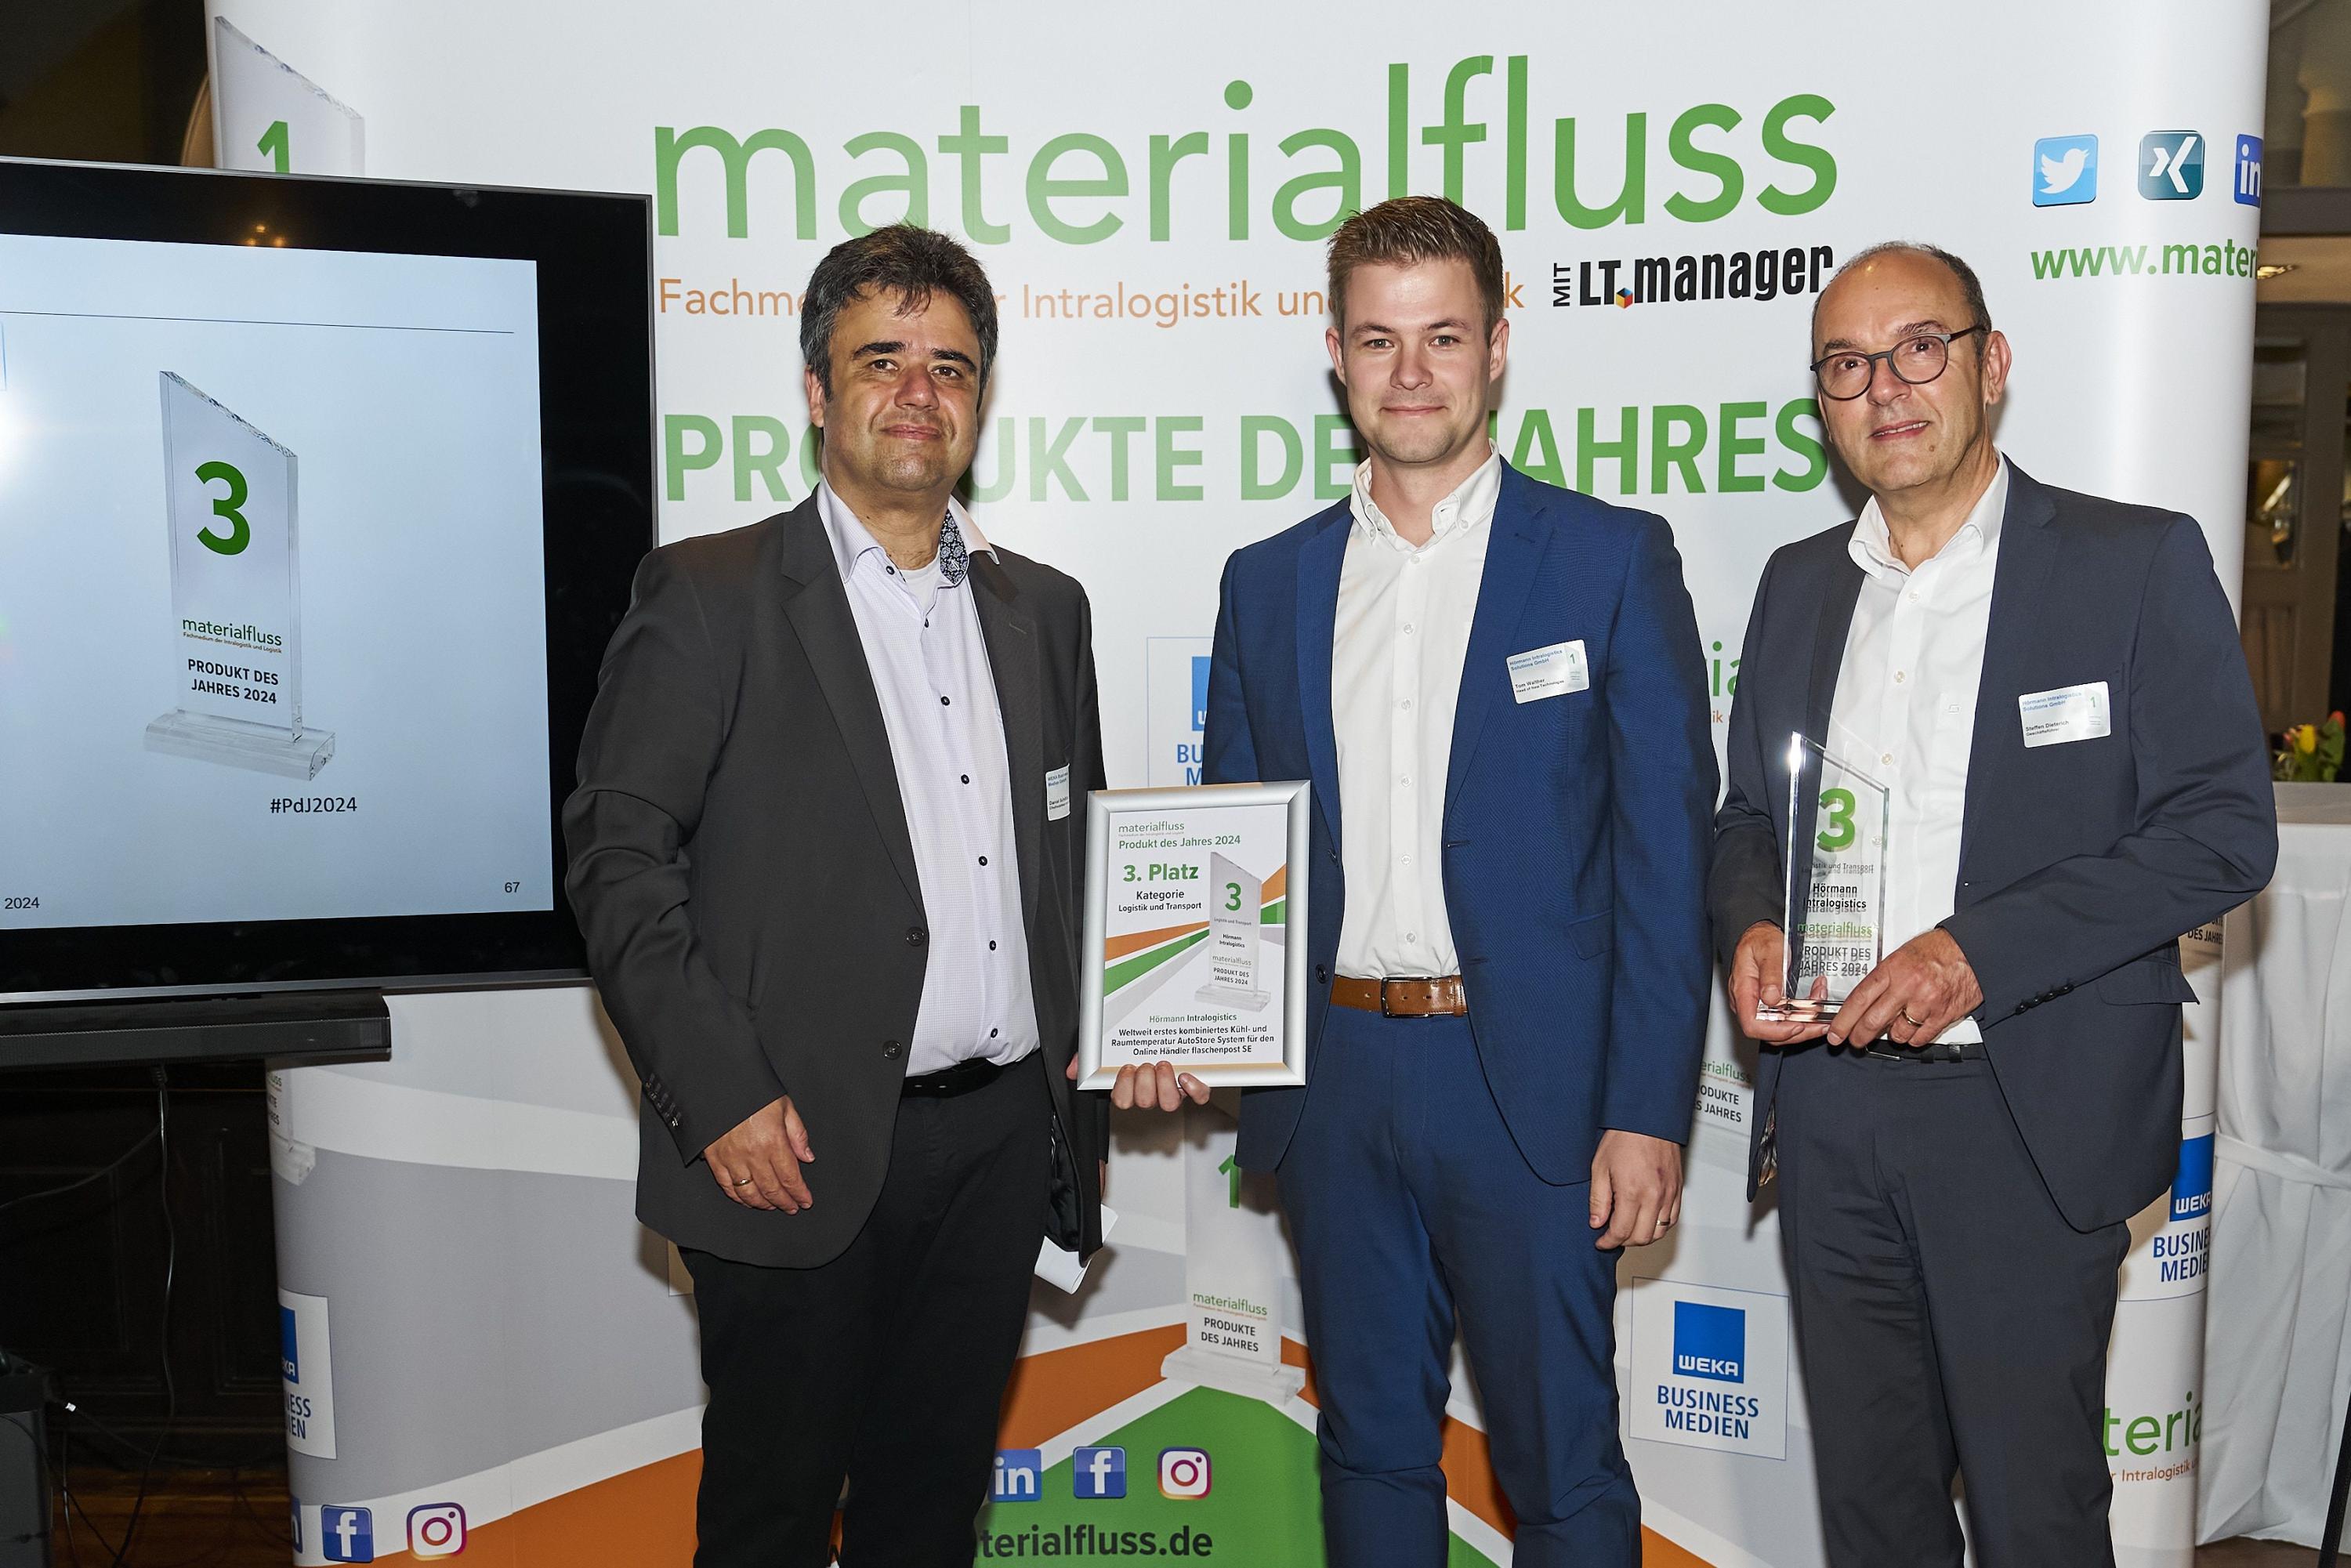 Materialfluss Magazin Product of the Year 2024 Award ceremony - Daniel Schilling, Tom Walter and Steffen Dieterich